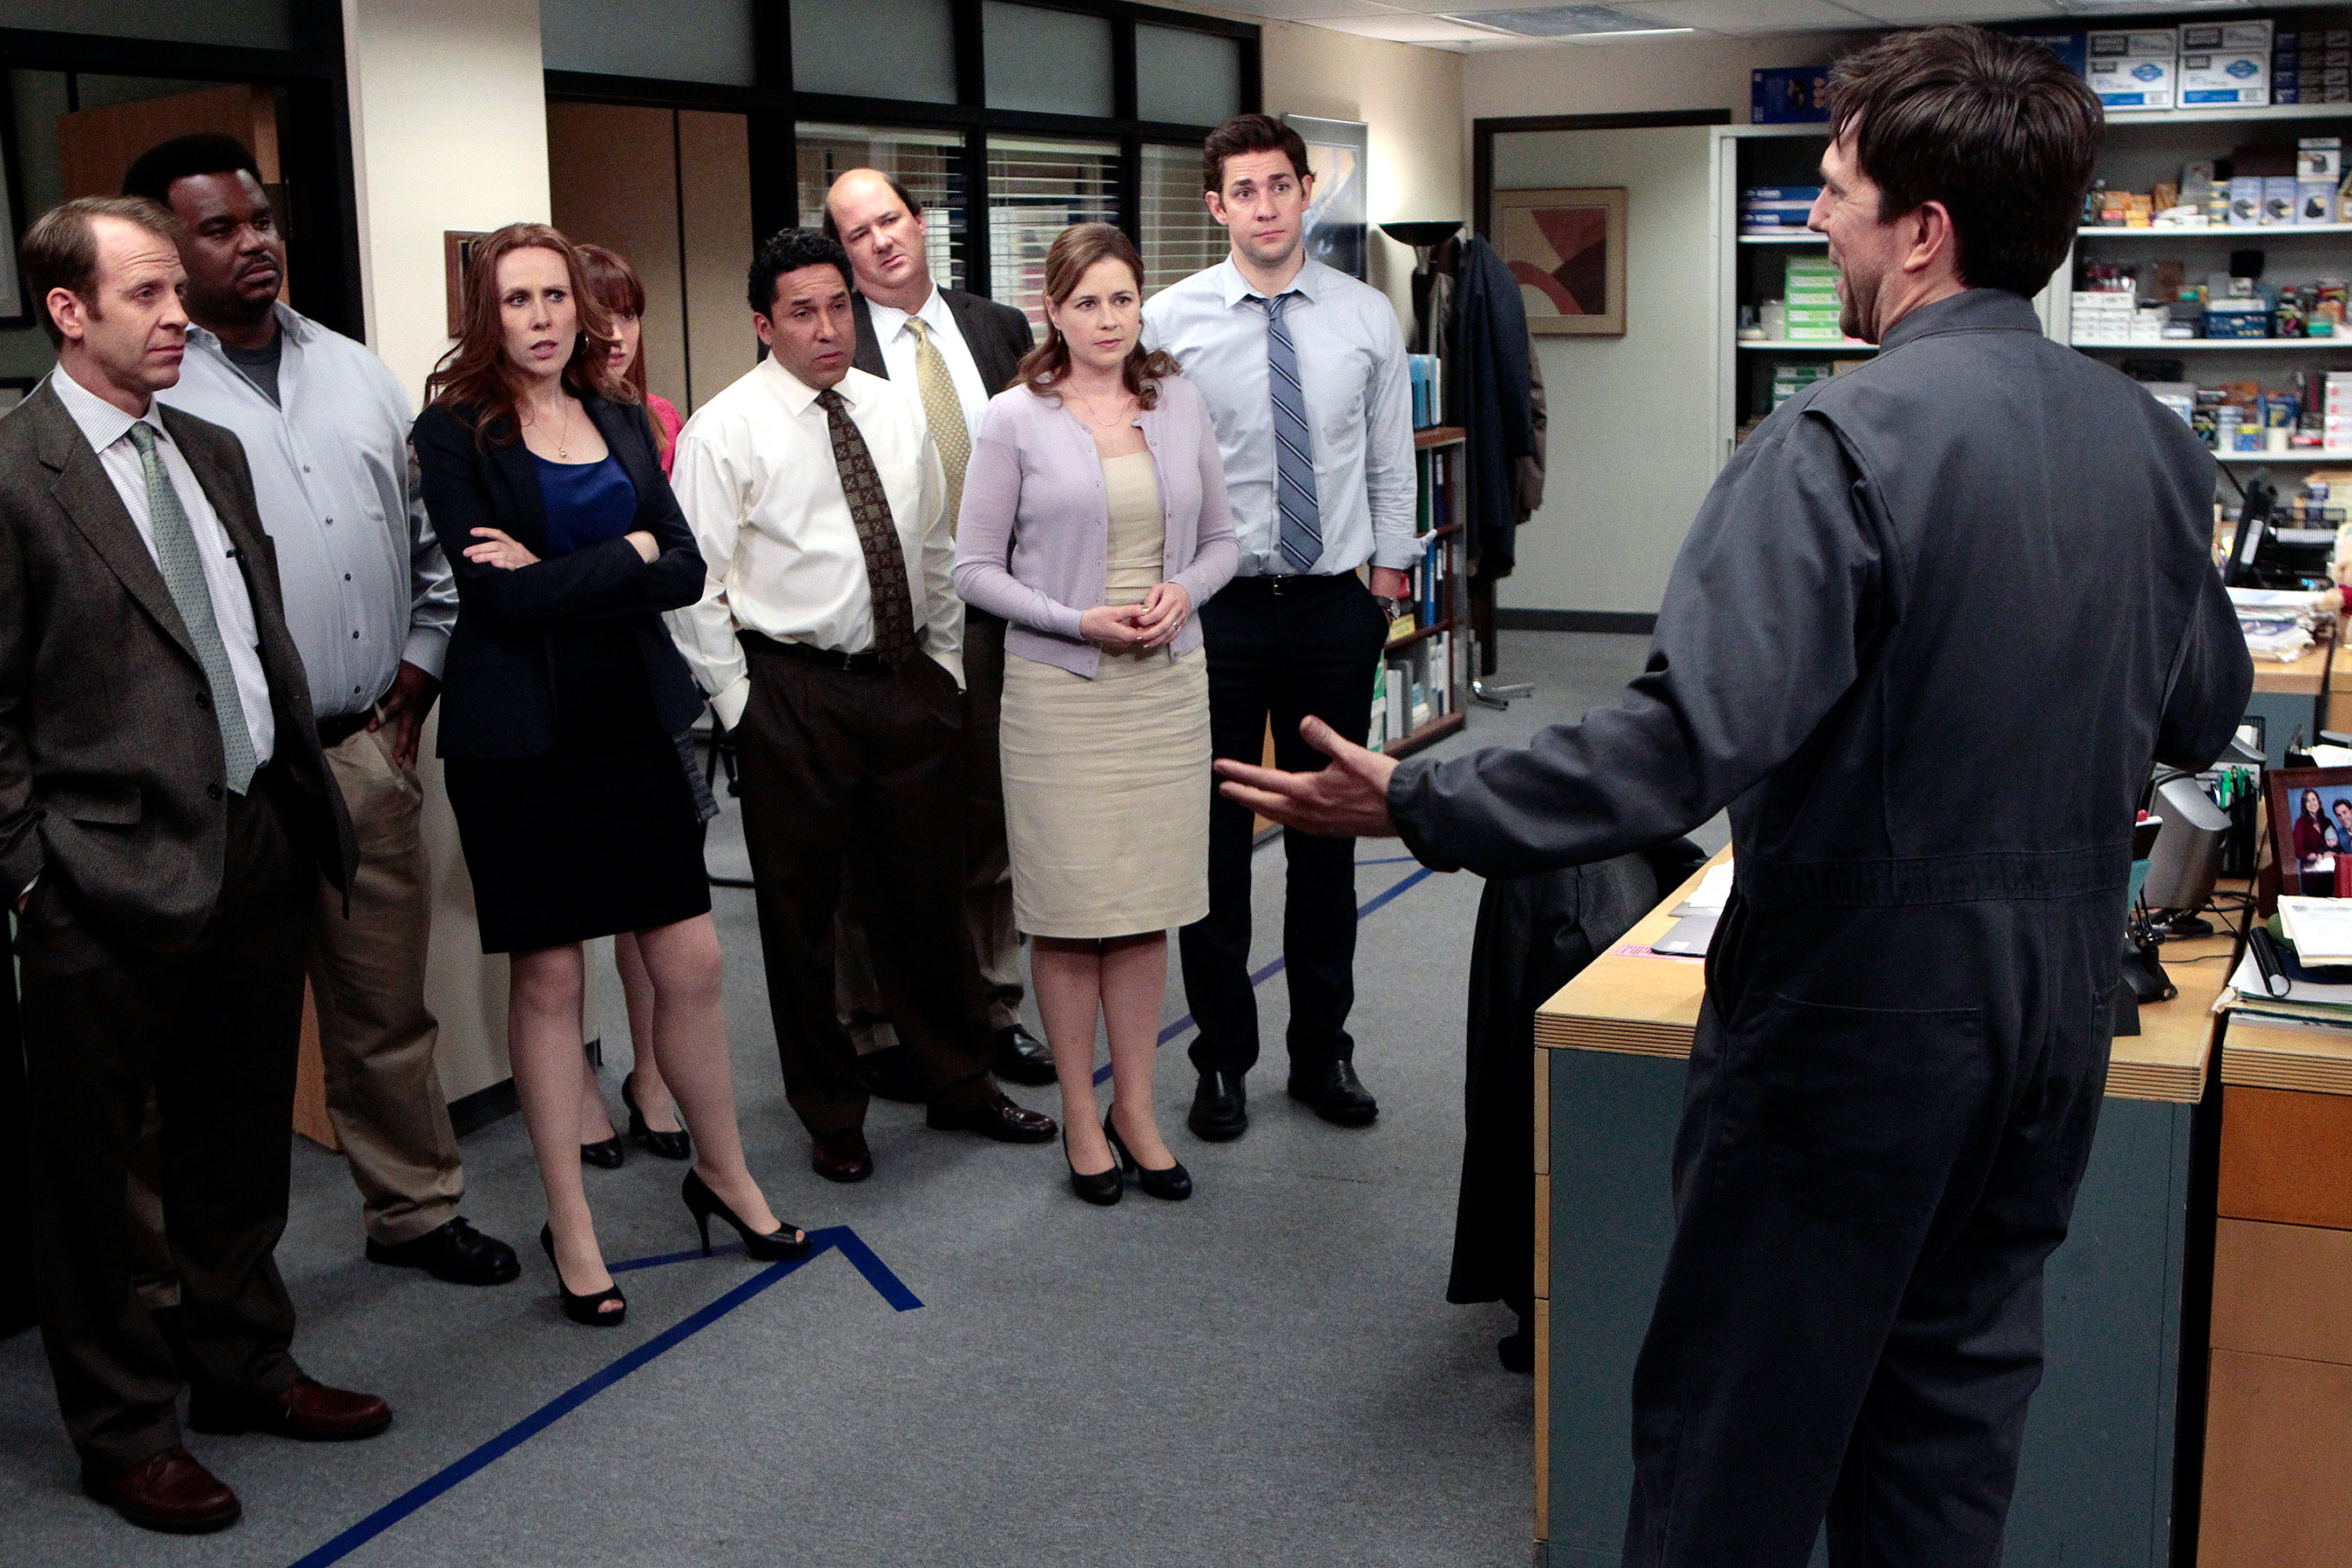 10 Things Any Potential “The Office” Reboot Has to Include